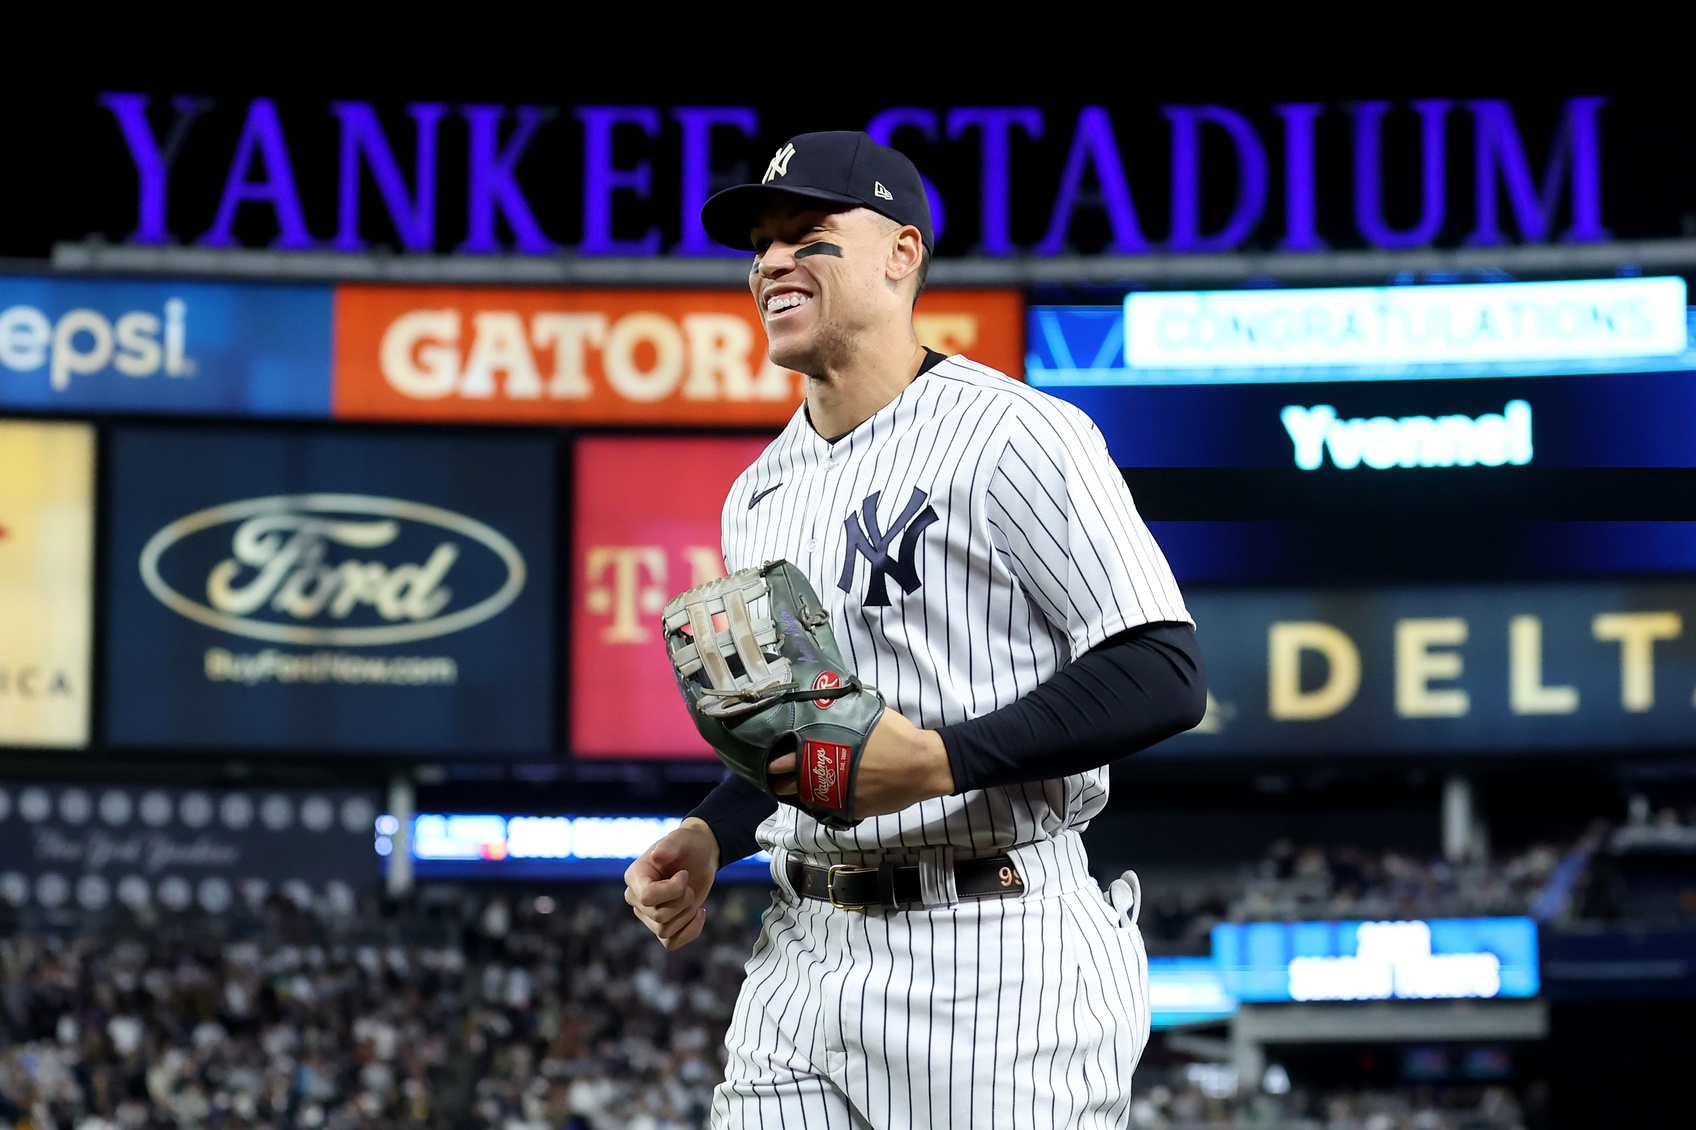 Yankees' Aaron Judge Robs Angels' Shohei Ohtani of HR With Epic